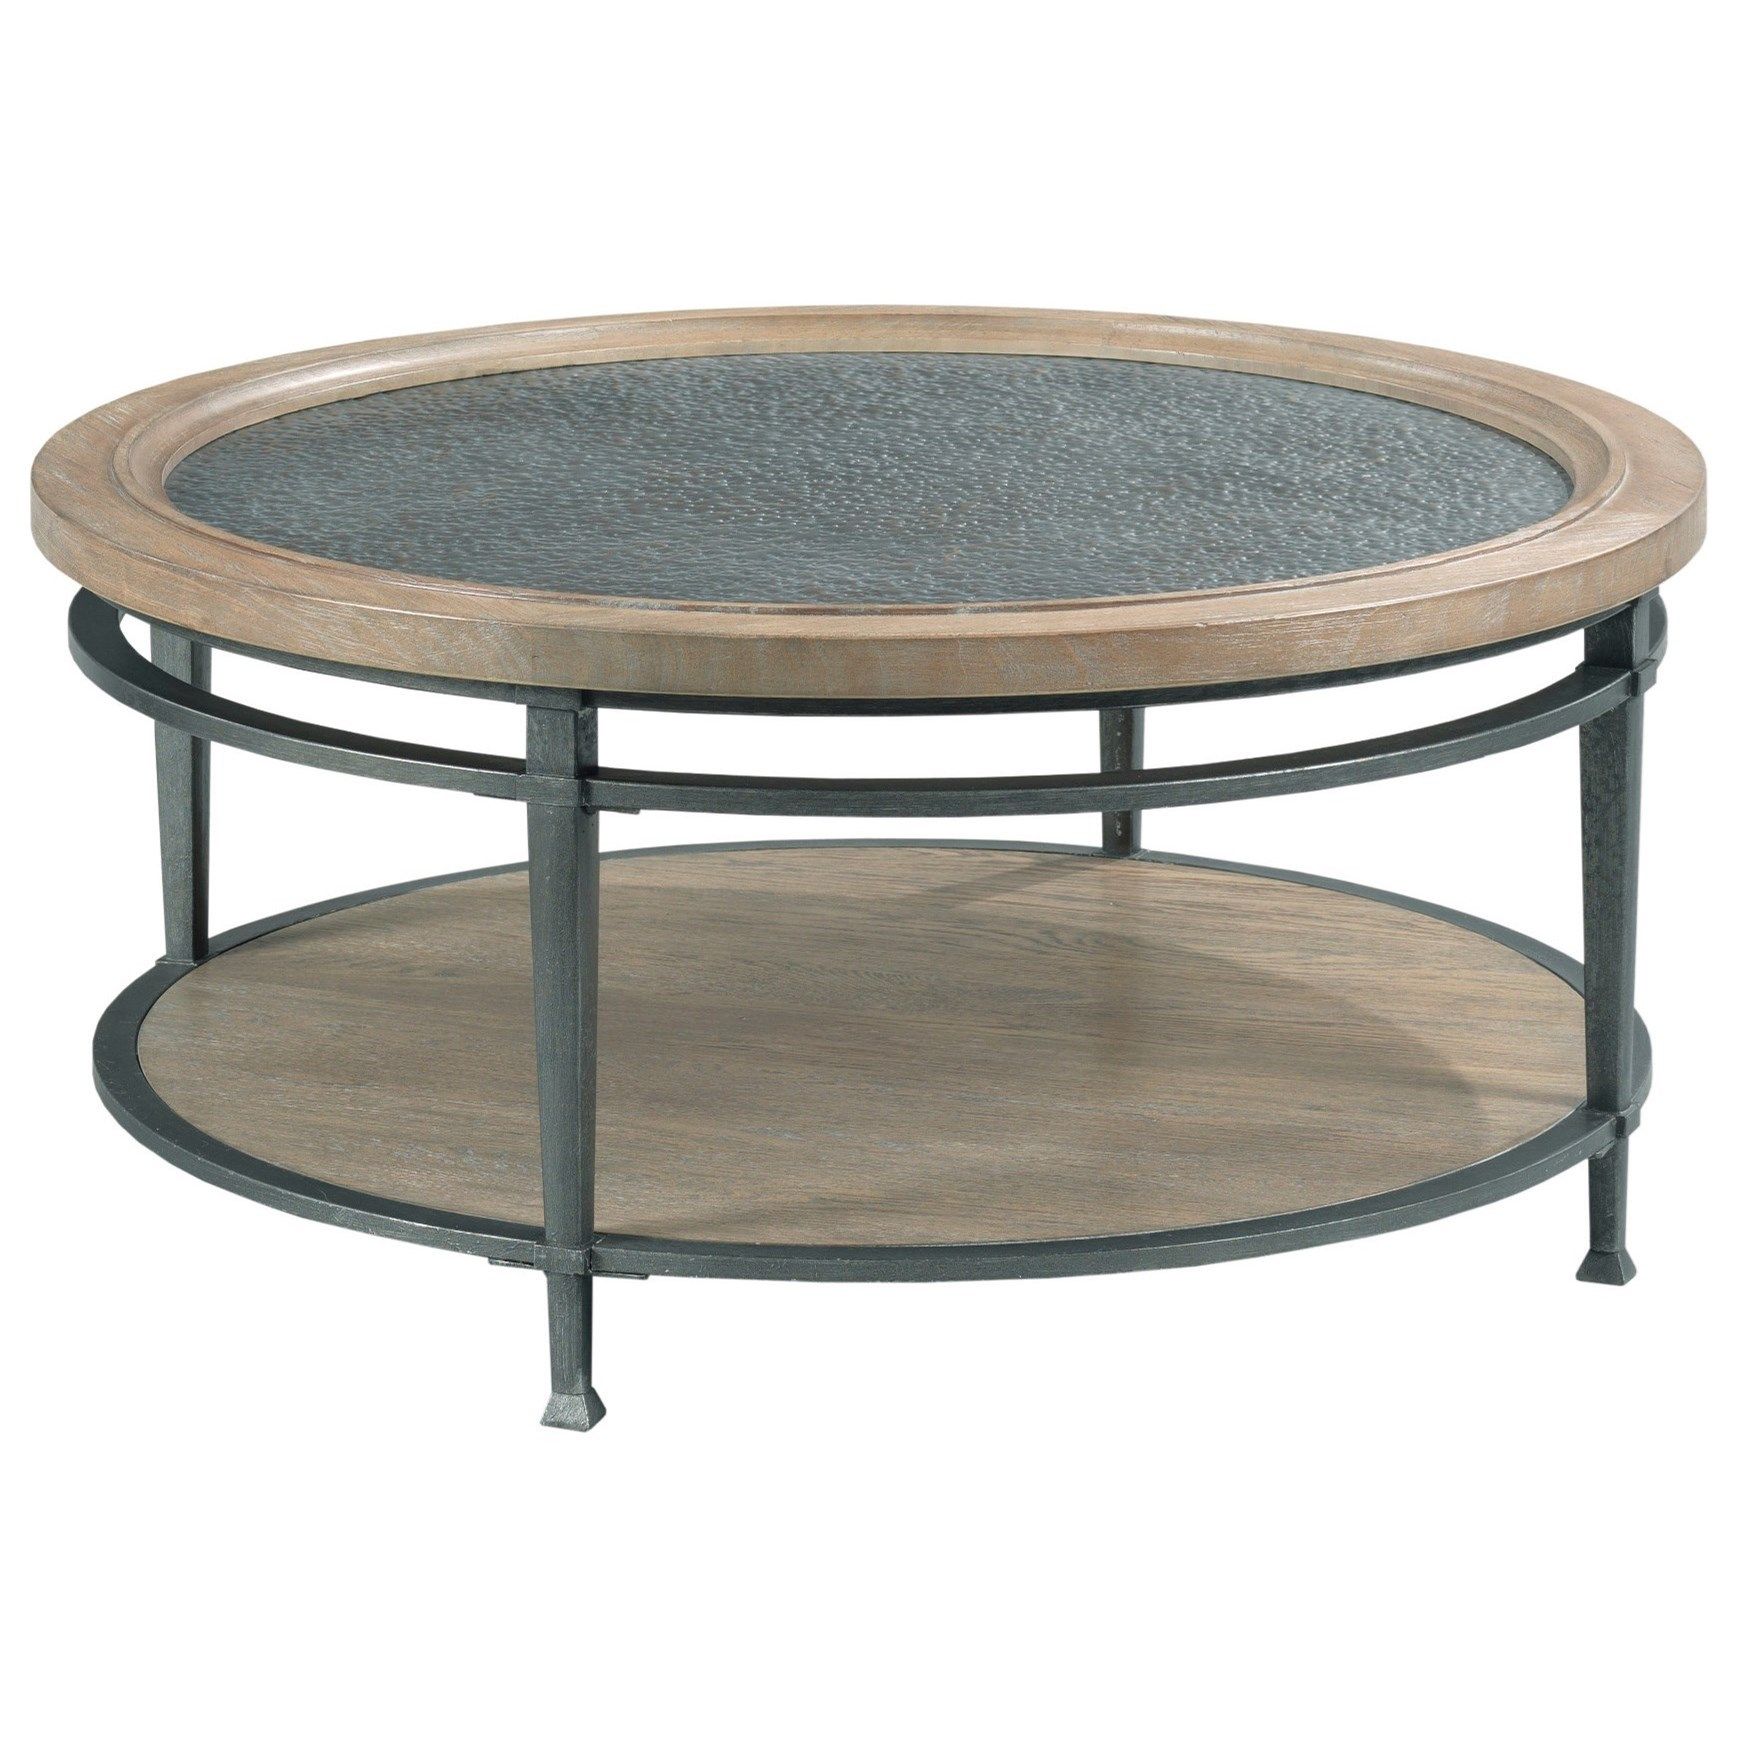 Hammary Austin Transitional Round Coffee Table | Wilson's Furniture With Regard To Monaco Round Coffee Tables (Gallery 9 of 20)